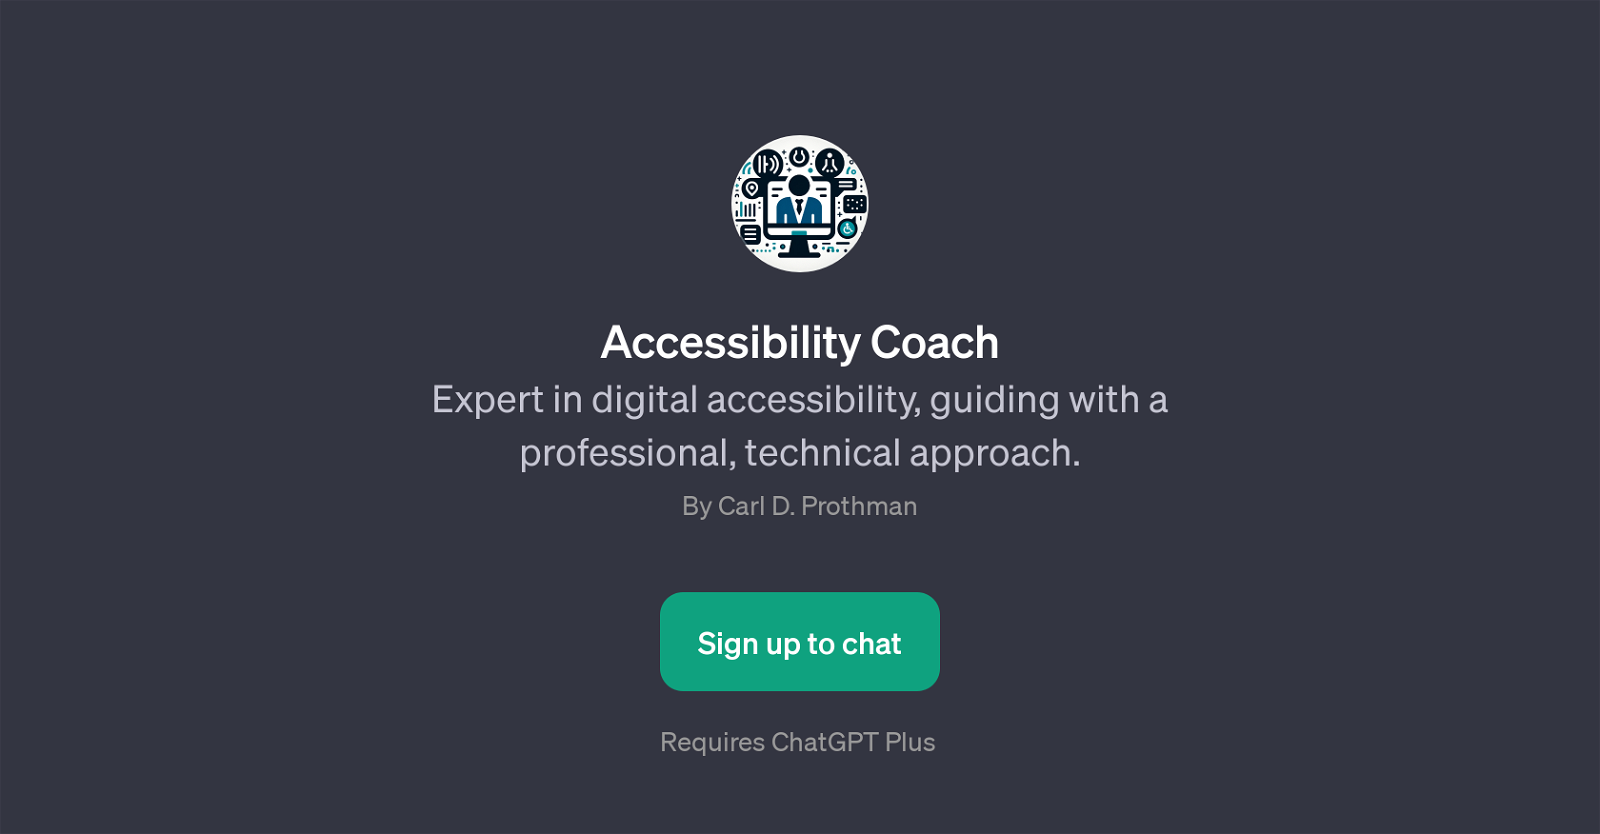 Accessibility Coach website